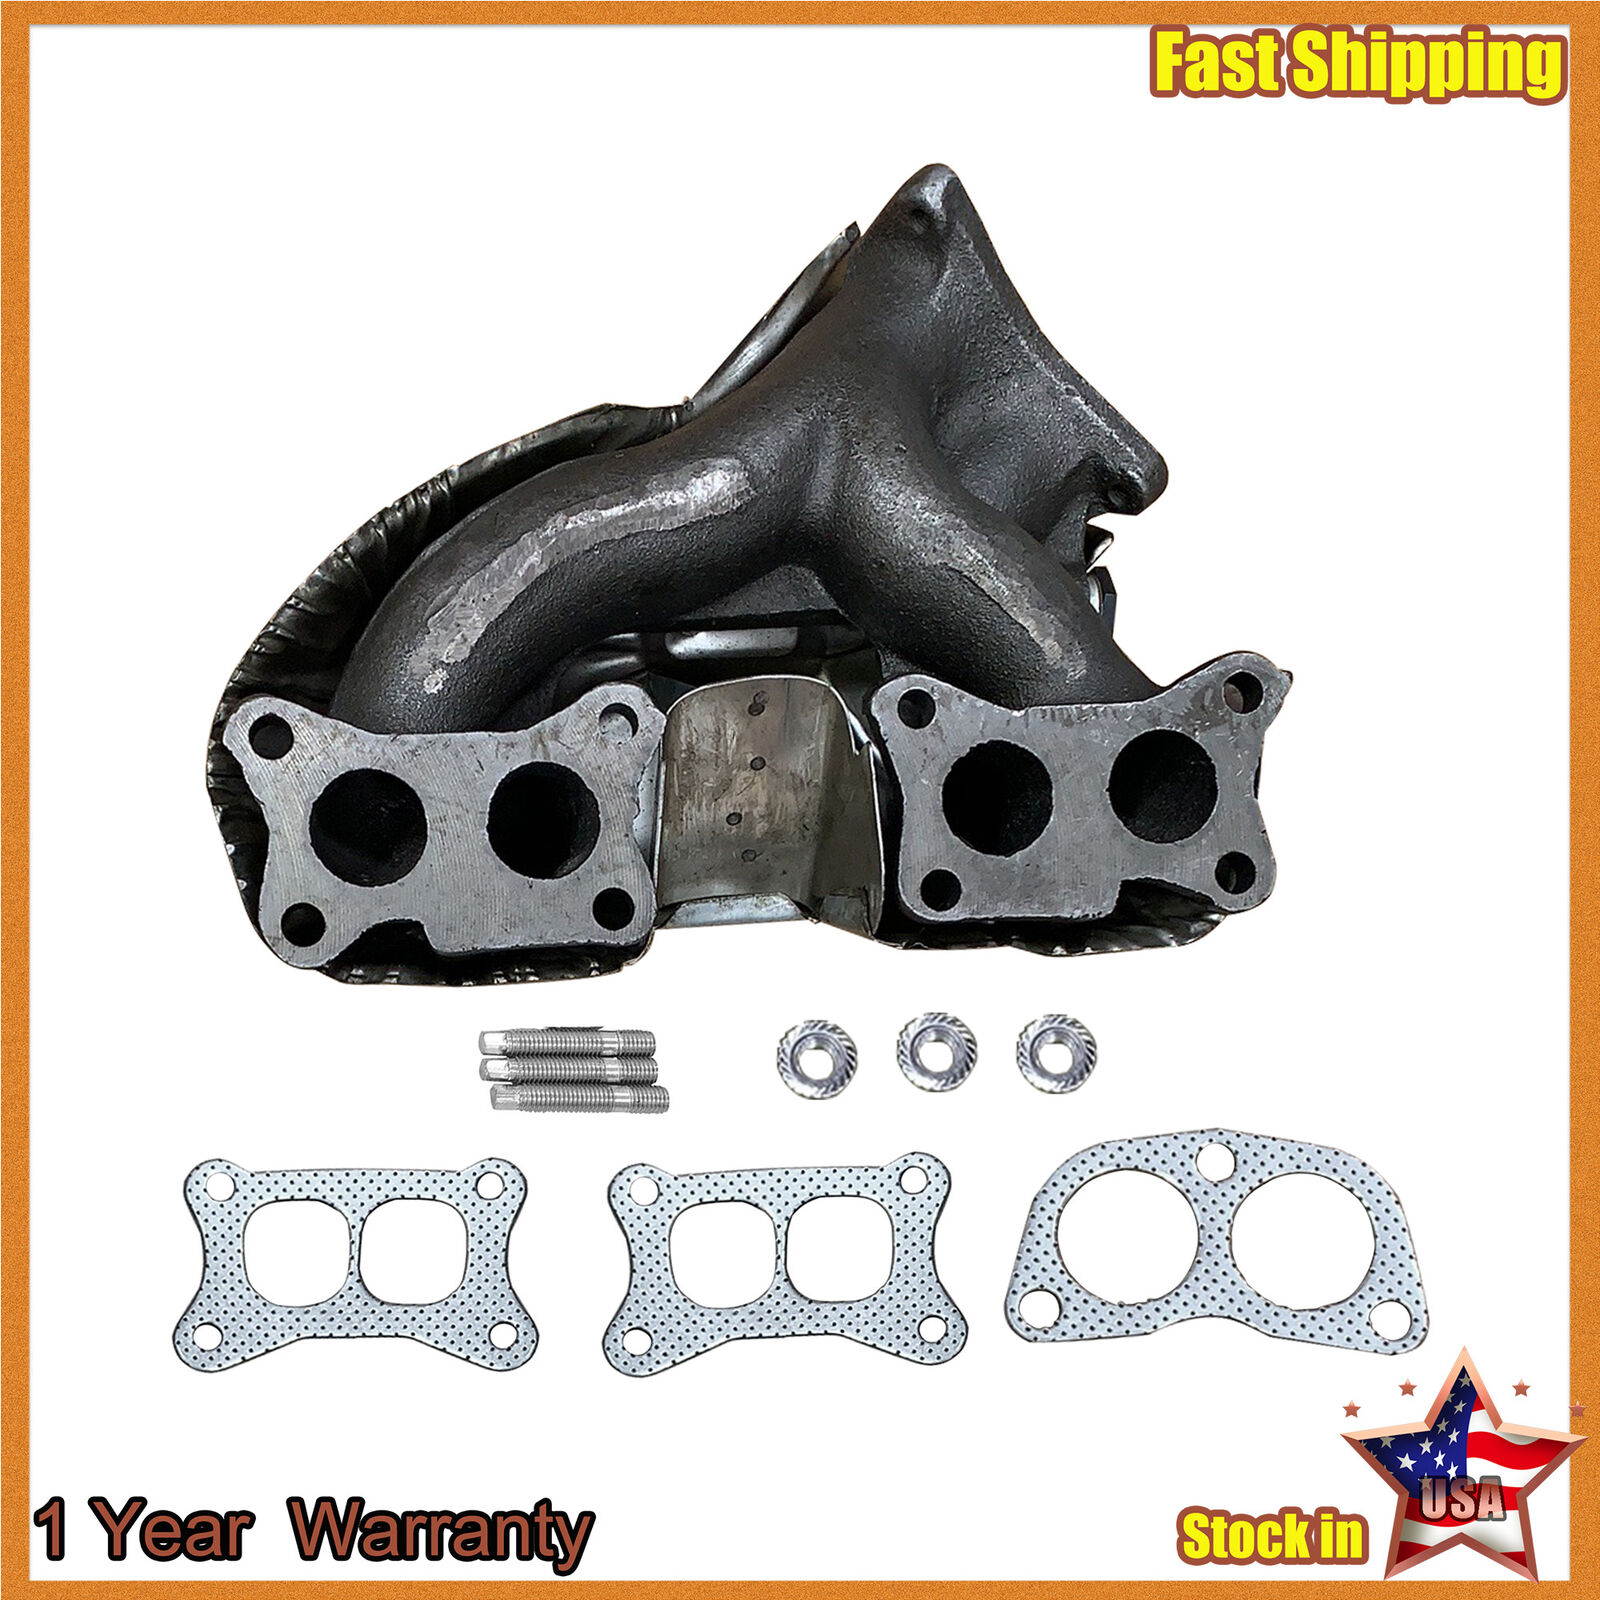 Exhaust Manifold + Gasket Fit 1990-1997 Nissan D21 Pickup 674-549 1400486G05